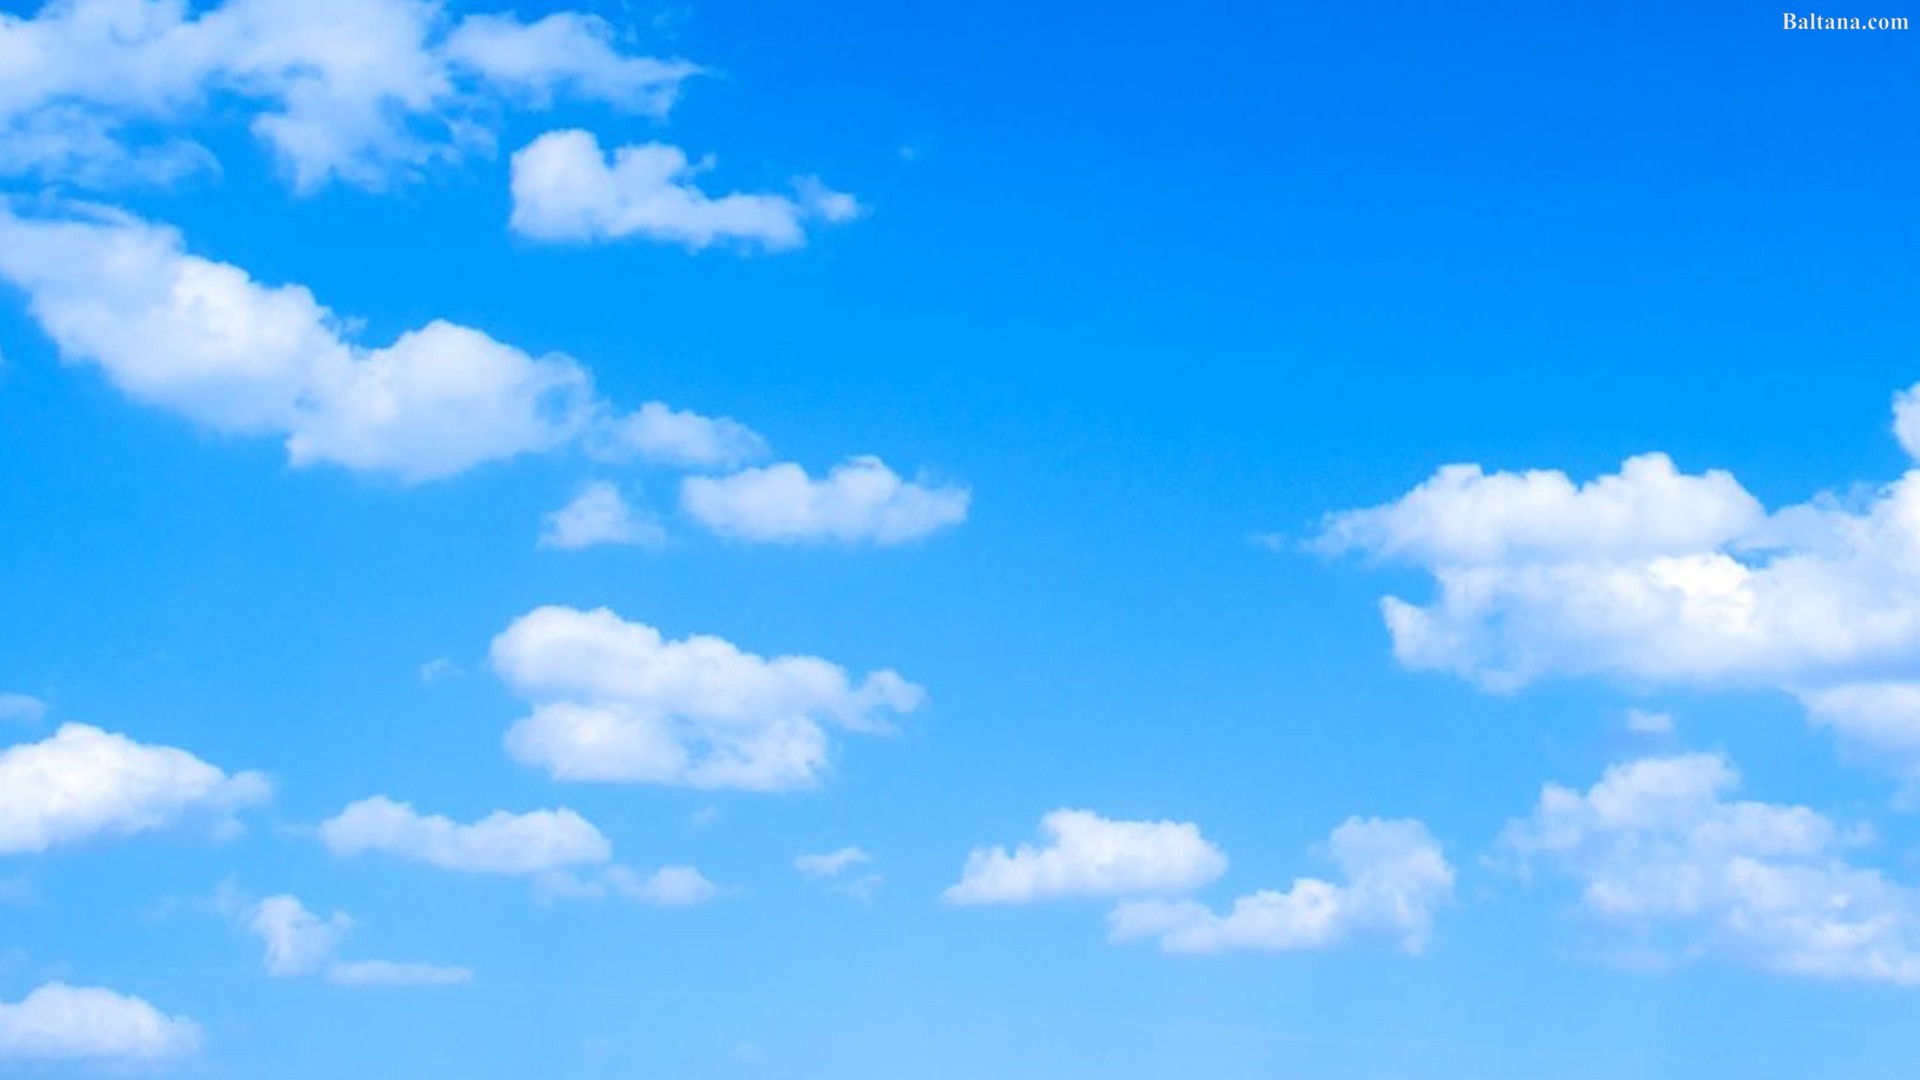 Download Clouds Wallpaper Hd Blue Sky With Few Clouds On Itlcat